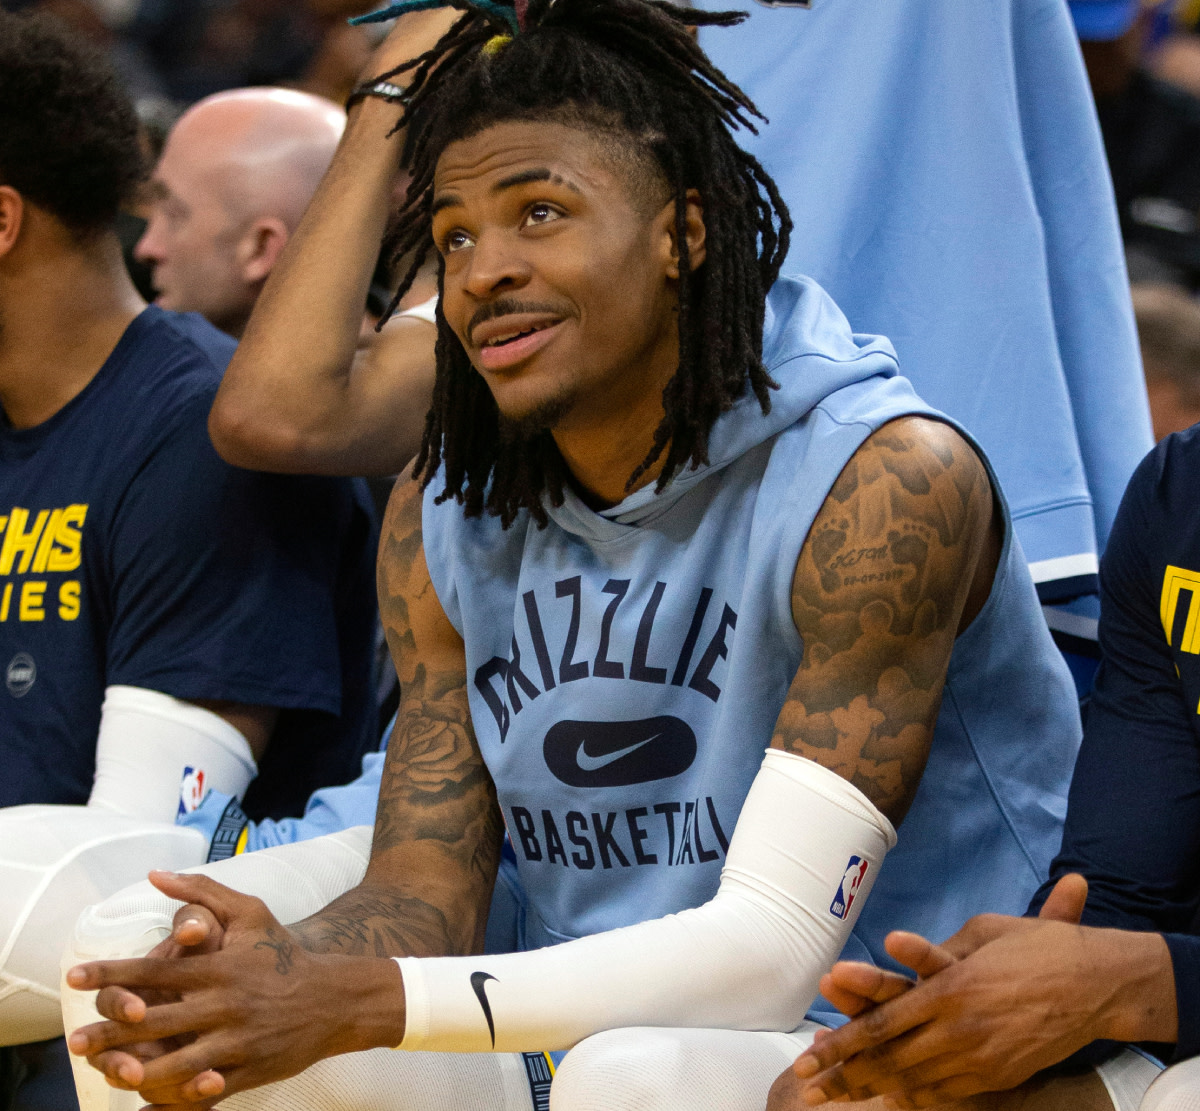 Ja Morant Posts A Series Of Cryptic Messages After Warriors Beat Grizzlies: “What This Means?”